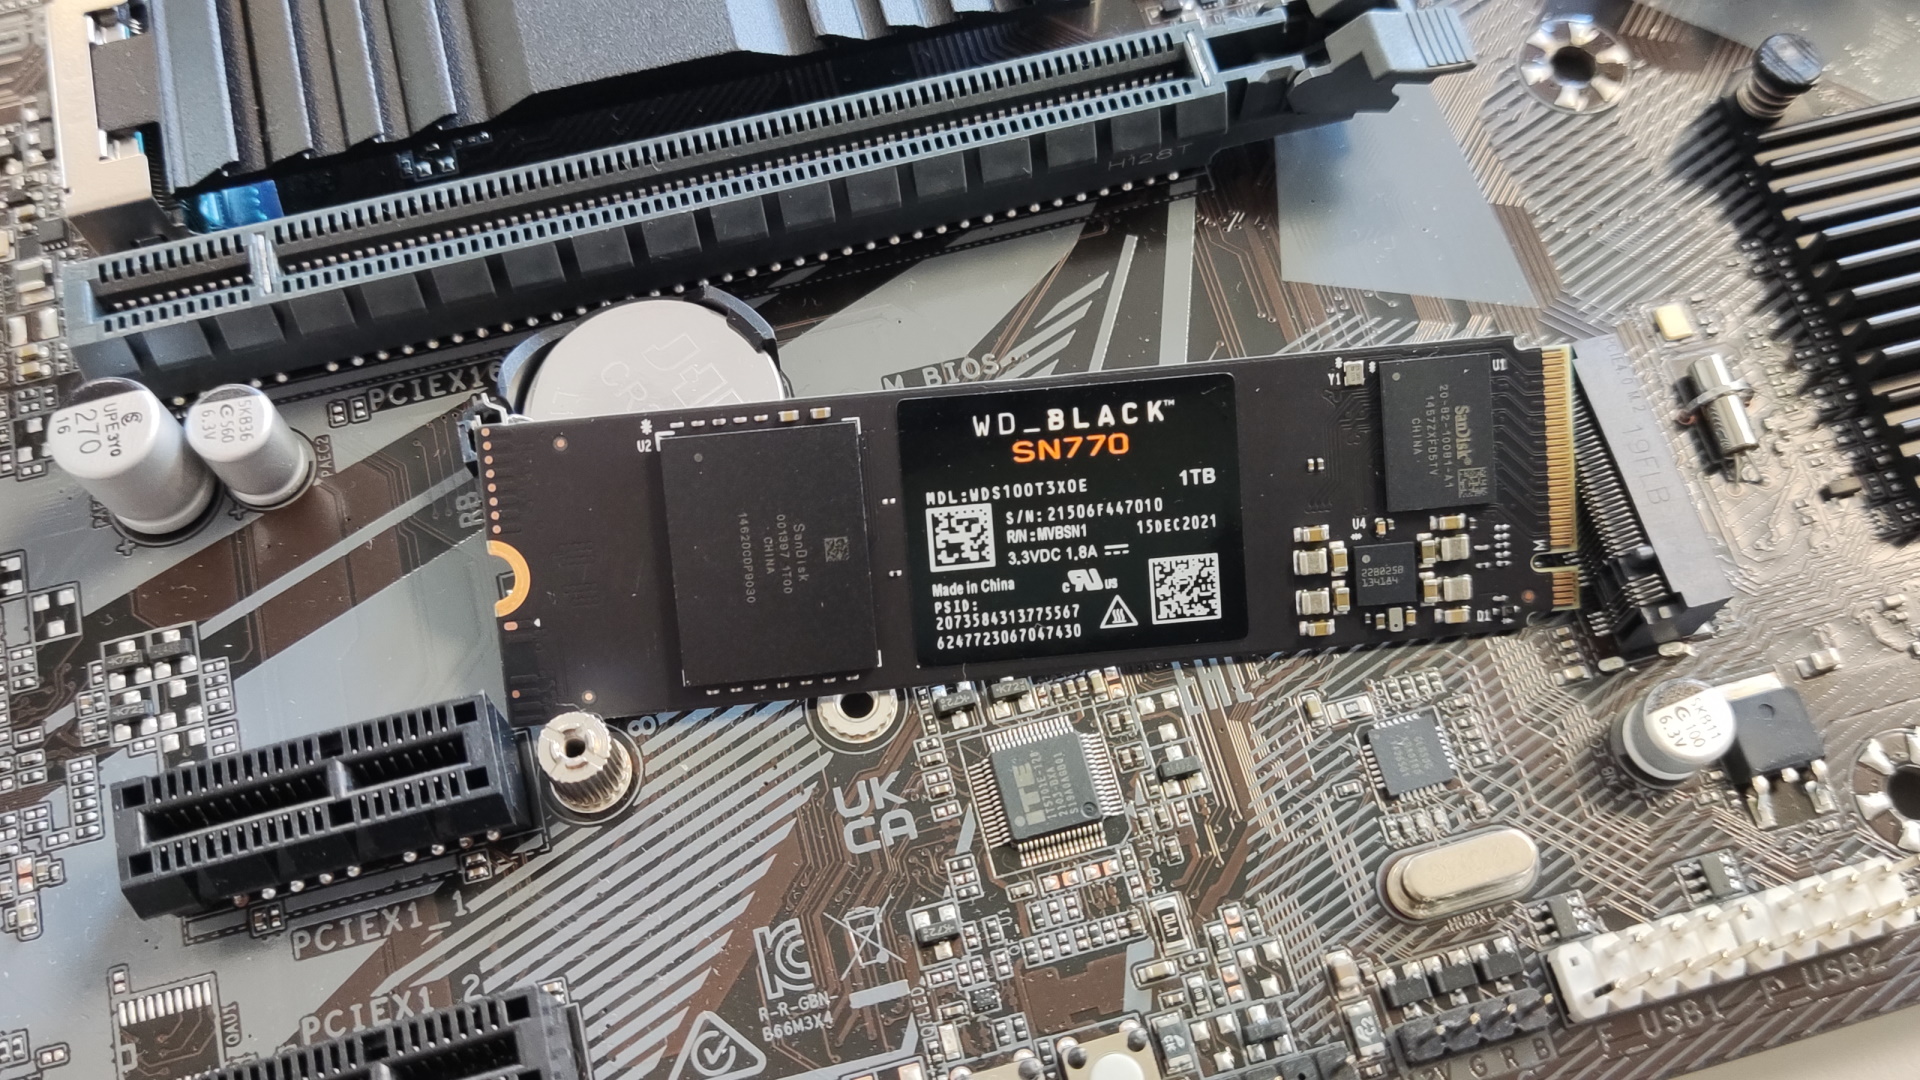 A Western Digital WD Black SN770 is placed on the motherboard.